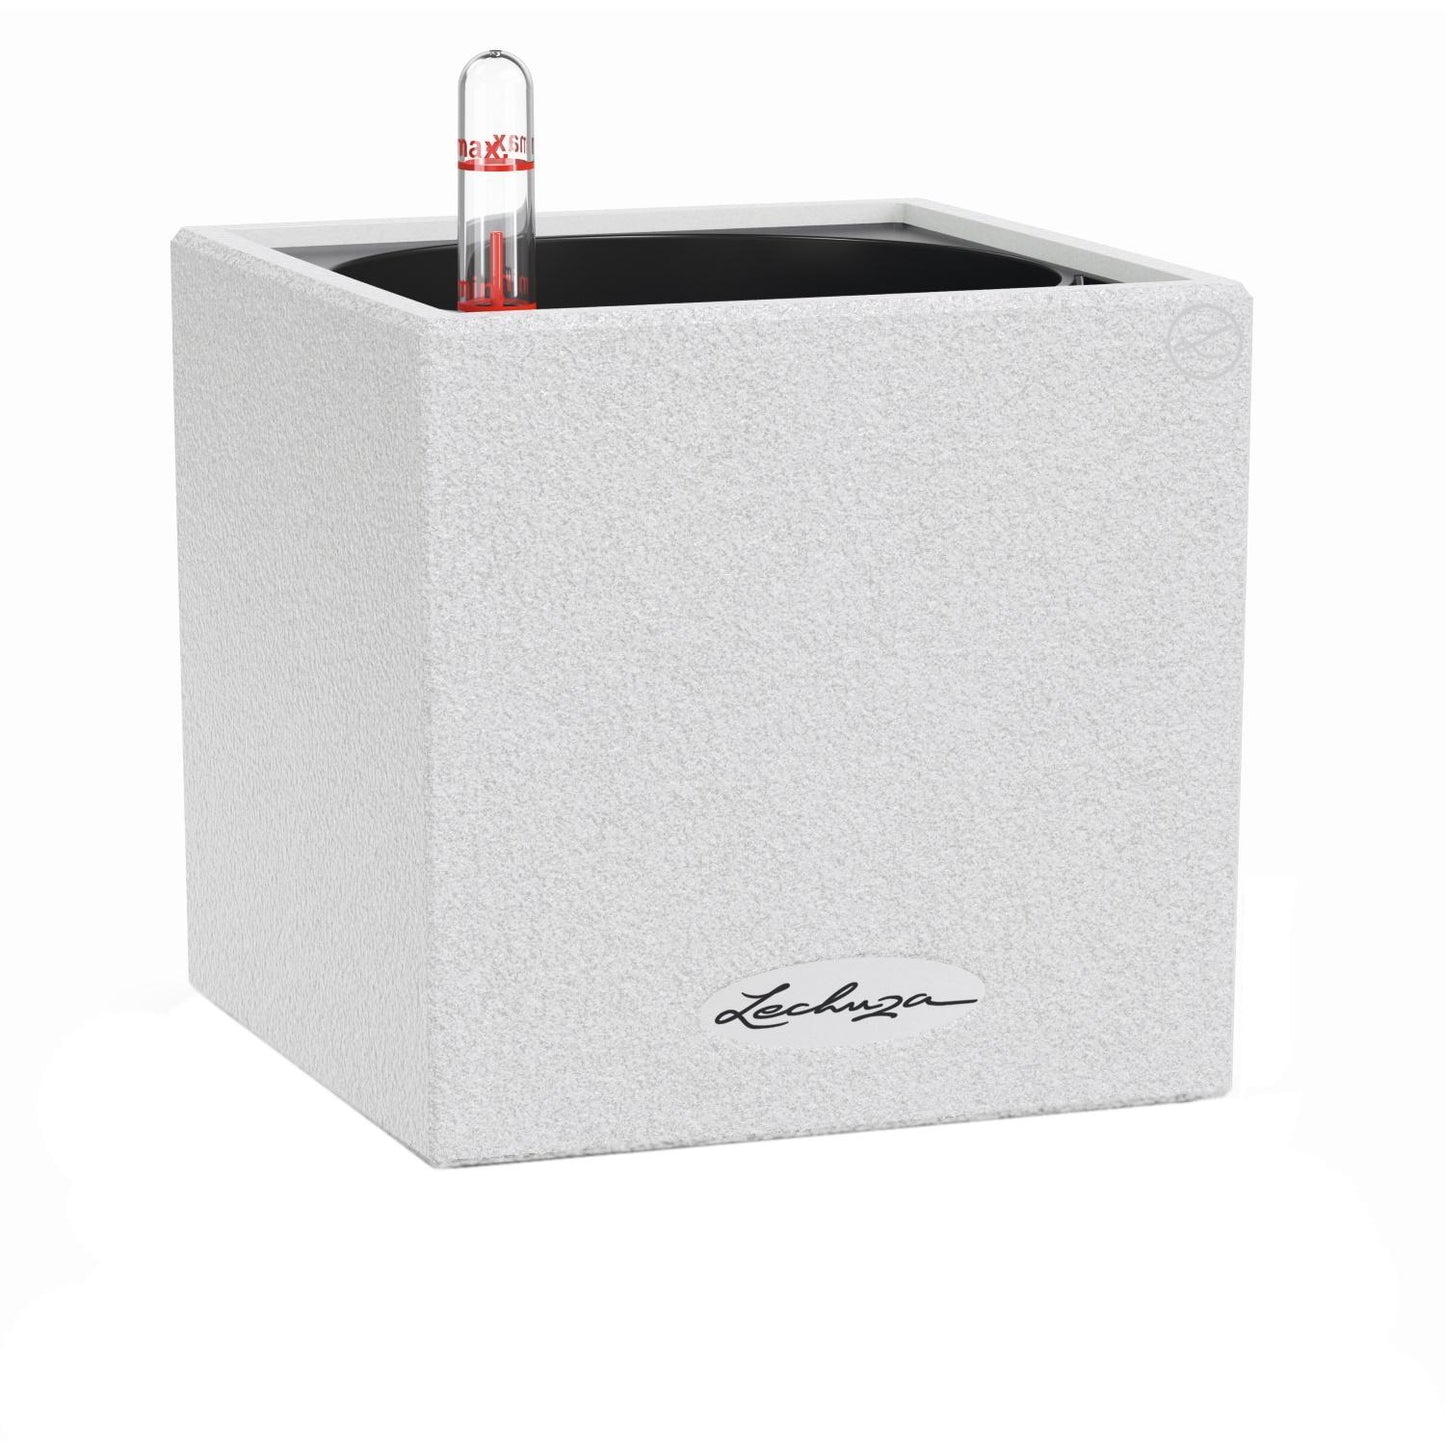 LECHUZA CANTO Stone 14  Poly Resin Table Self-watering Planter with Water Level Indicator - citiplants.com